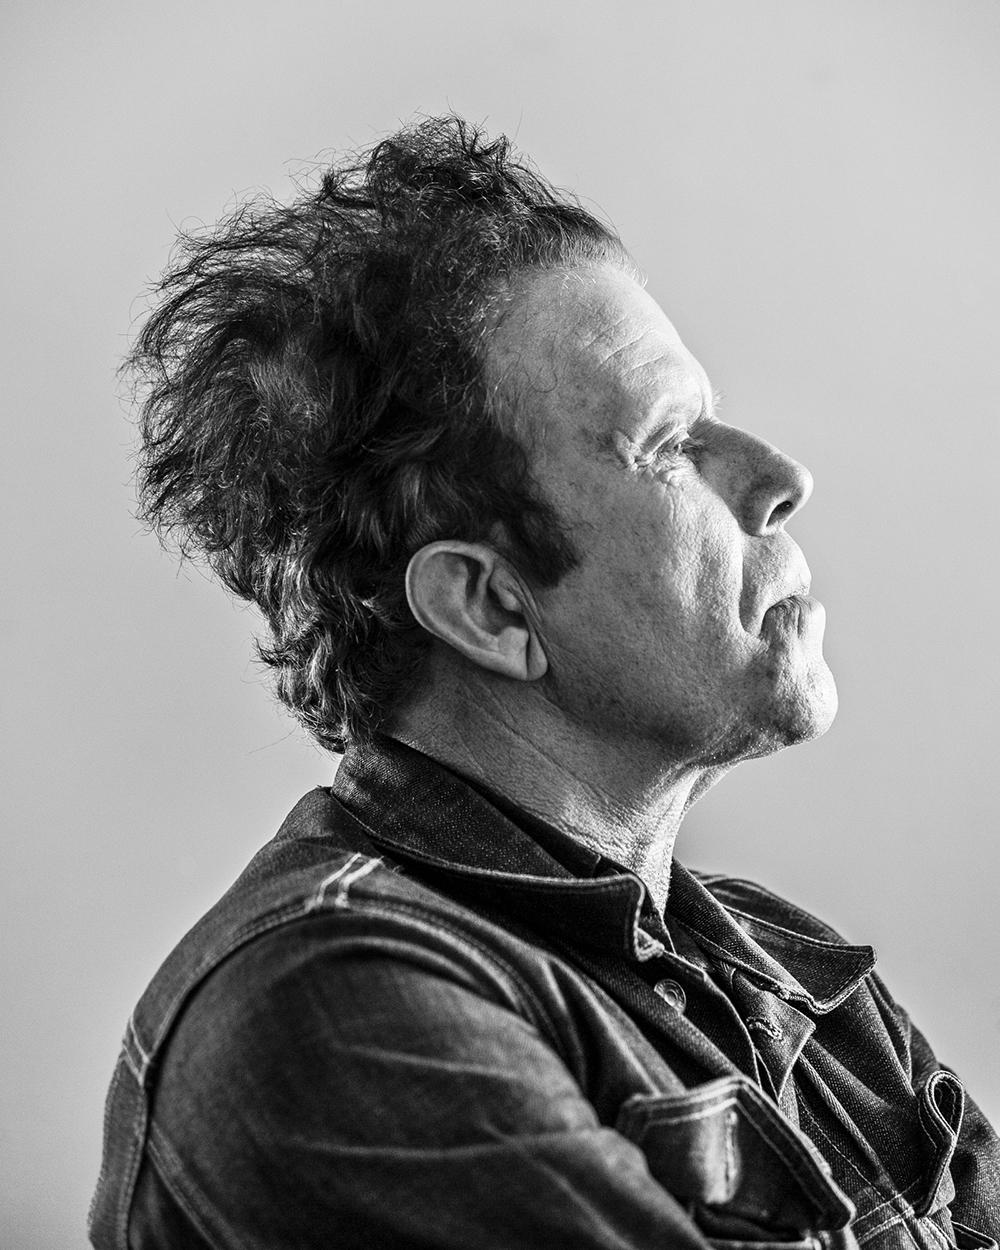 DON T YOU KNOW THERE AIN T NO DEVIL, THERE S JUST GOD WHEN HE S DRUNK | HAPPY BIRTHDAY, MR. TOM WAITS (65) | 